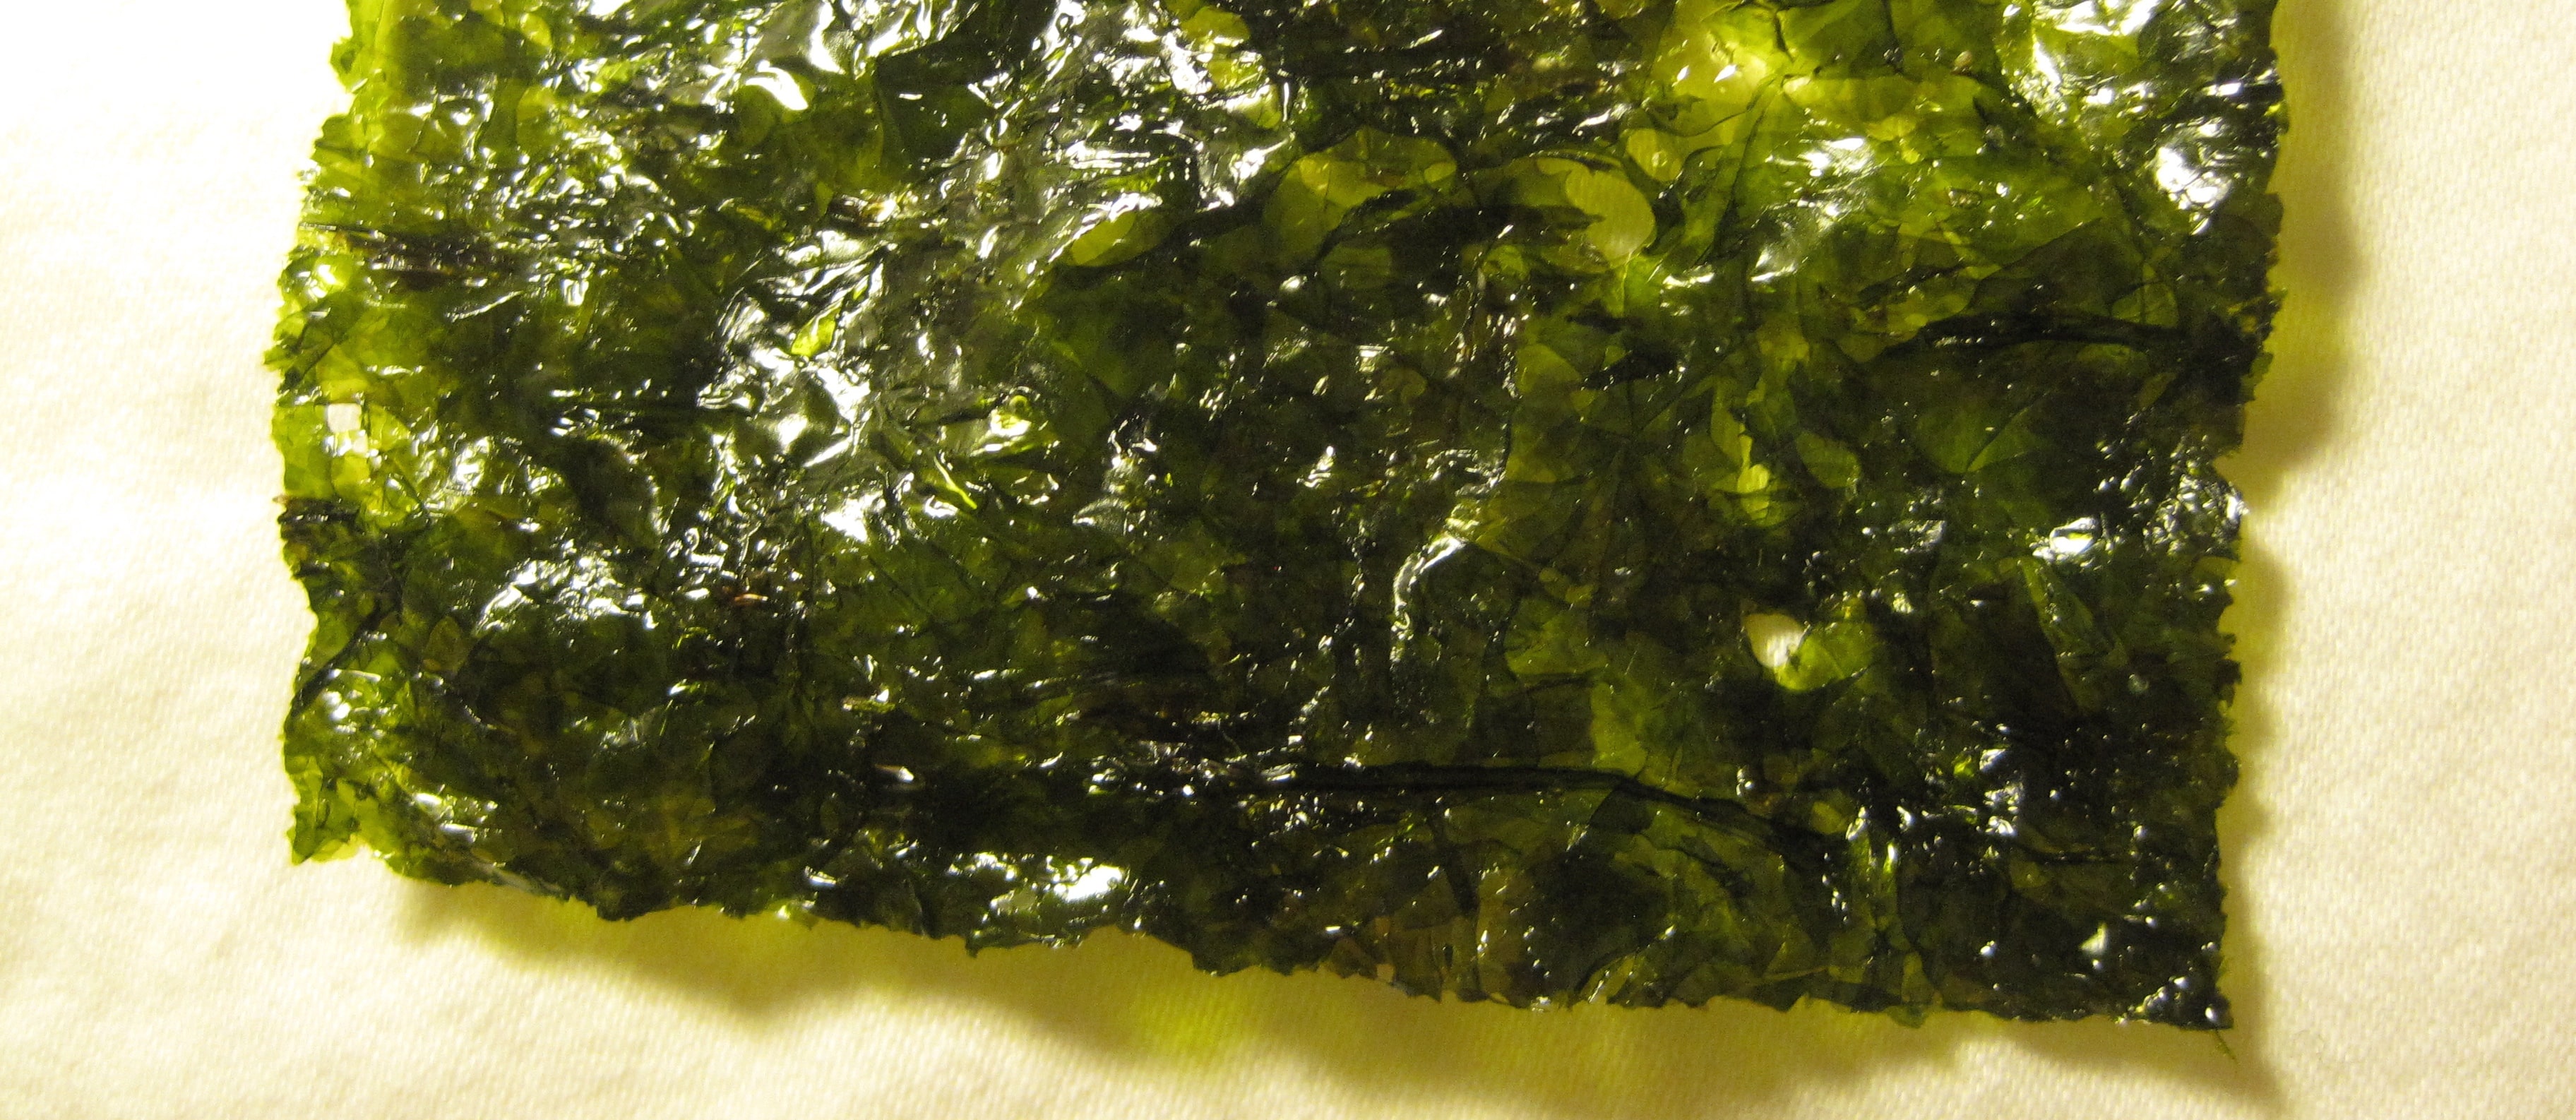 Which Seaweed is Protective Against Cancer?